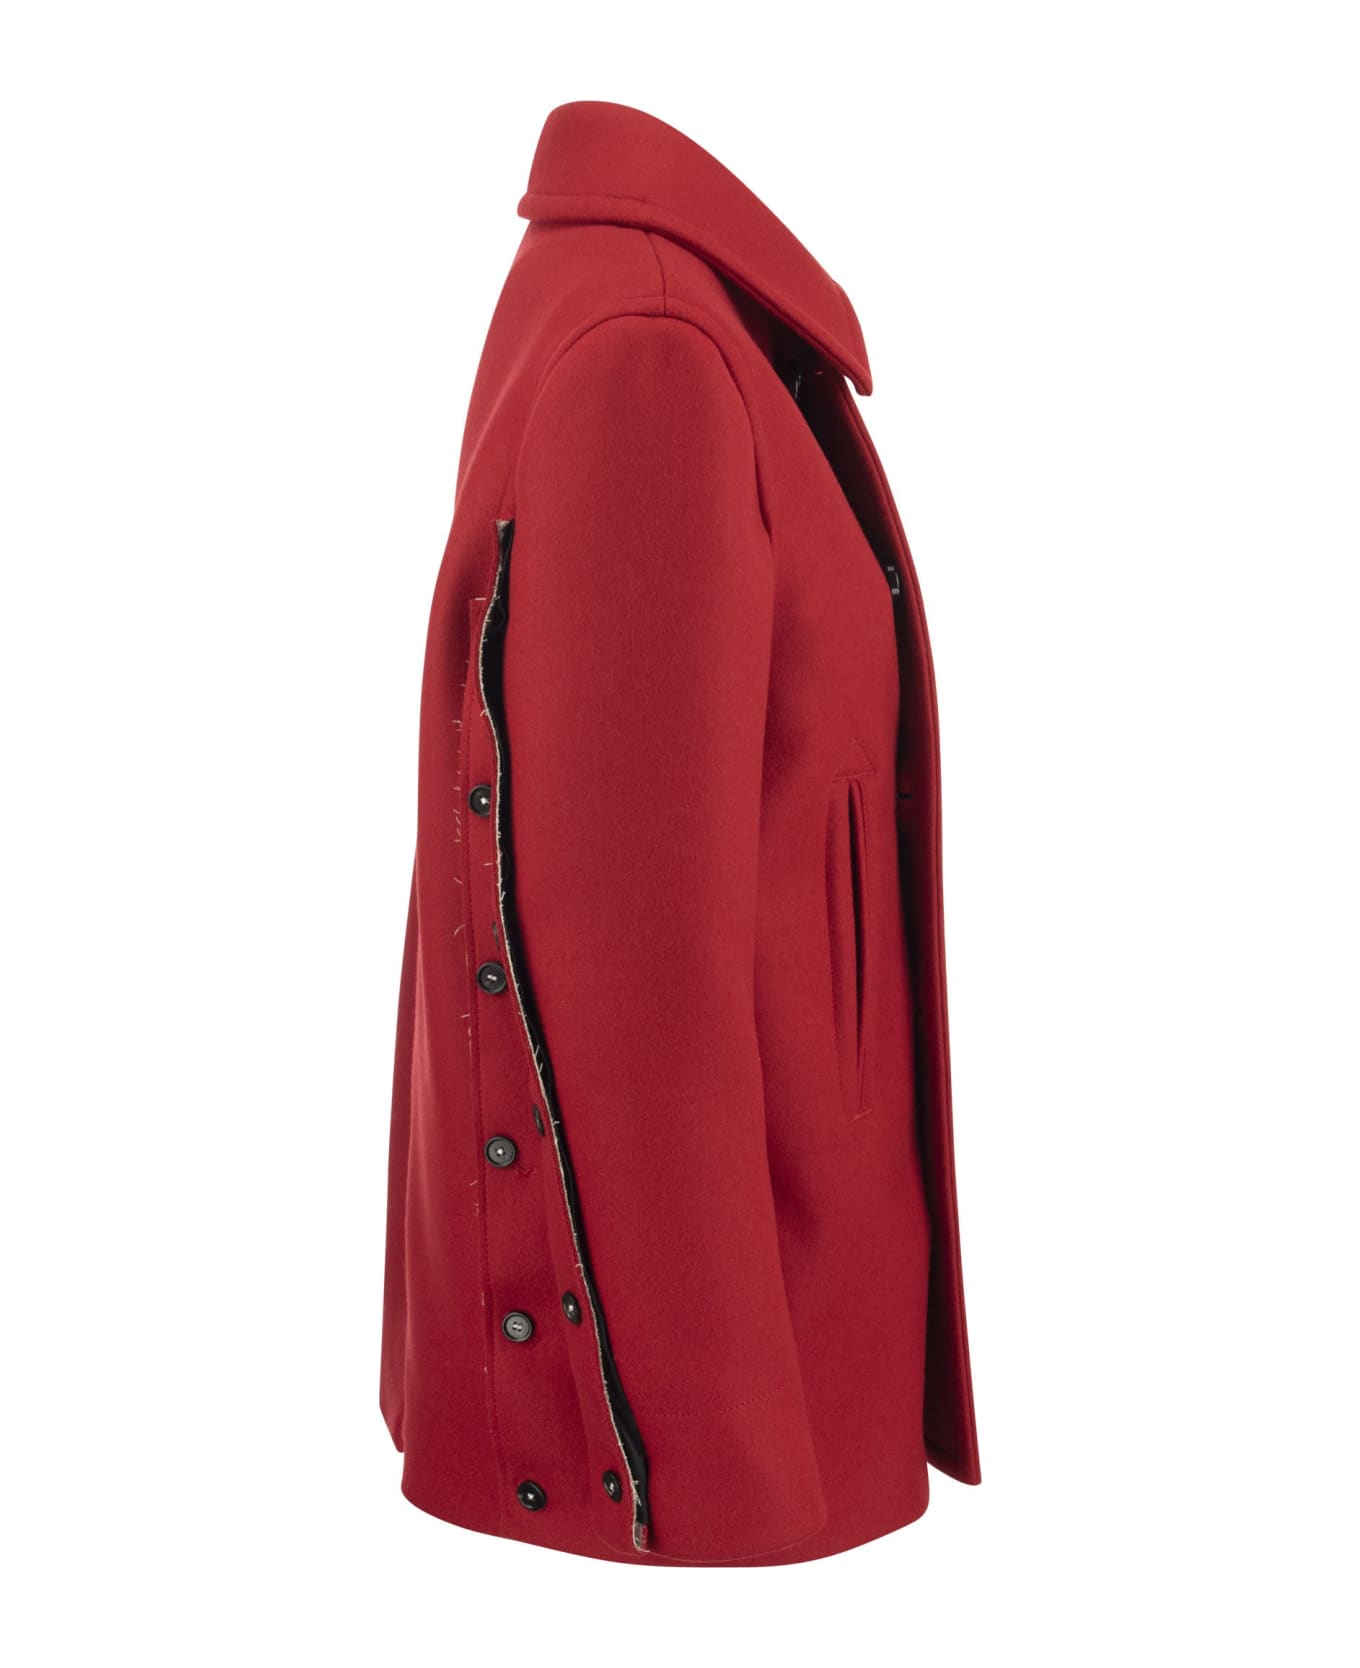 Marni Double-breasted Wool Coat - Red